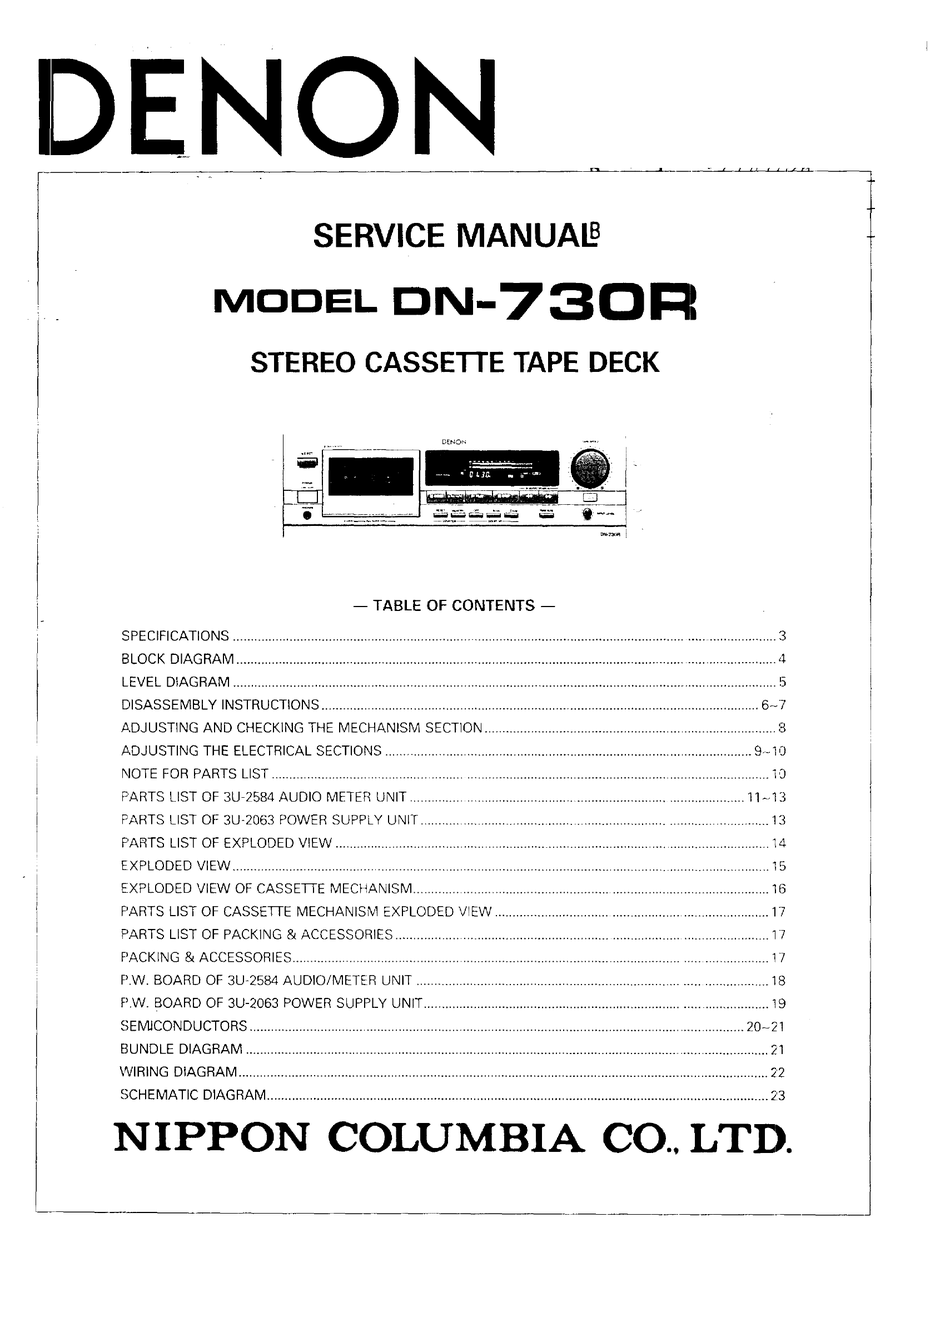 Denon DN-790R Stereo Cassette Tape Deck Owners Manual 